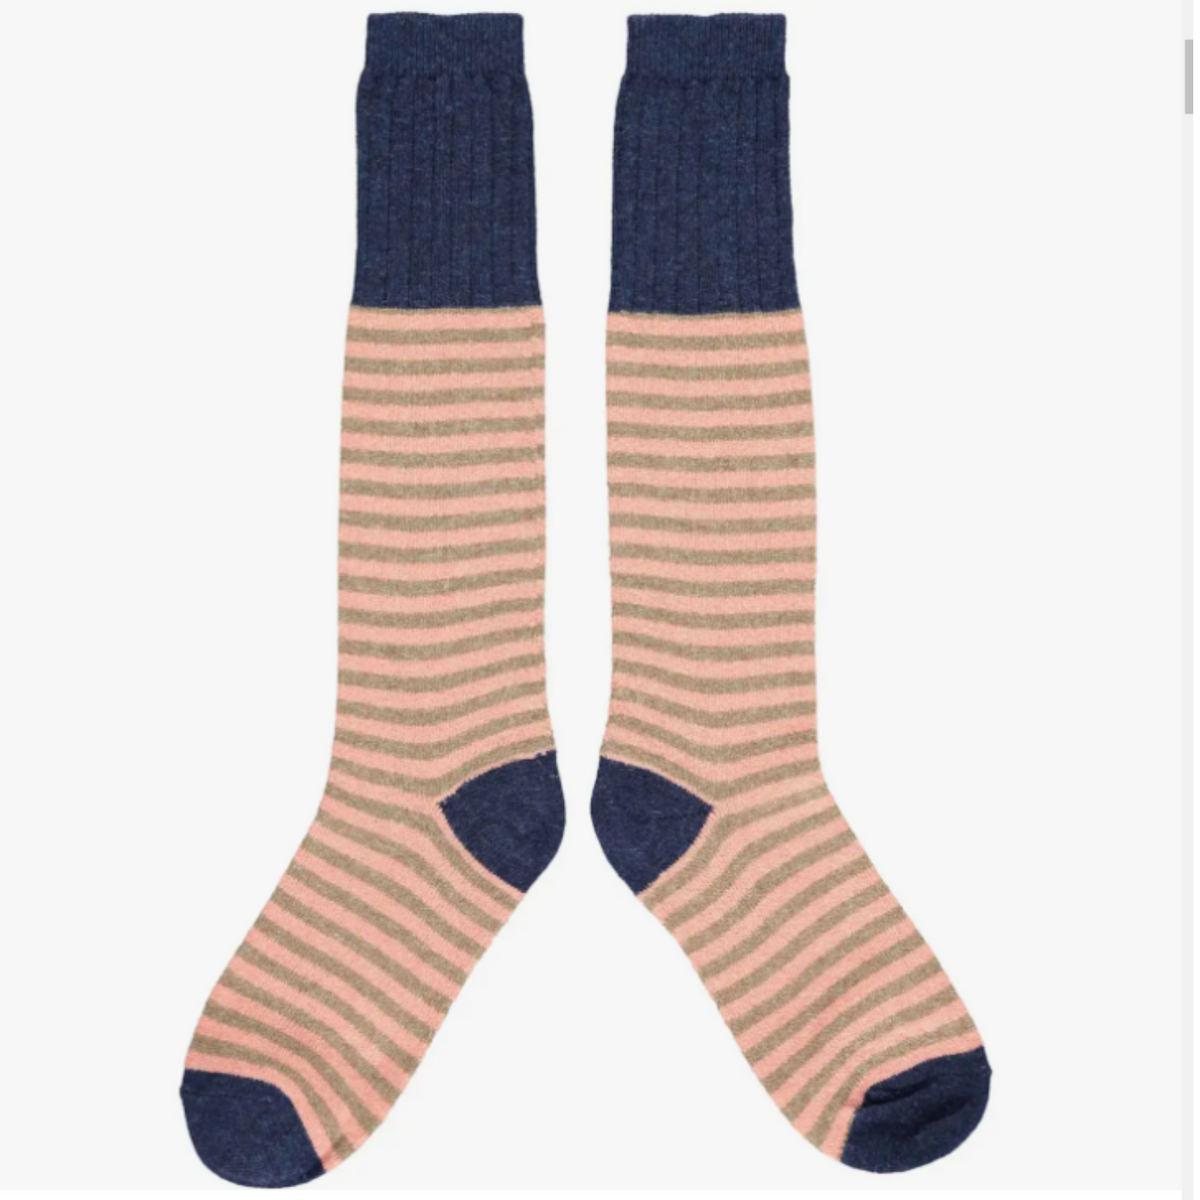 Catherine Tough women&#39;s lambswool knee socks featuring salmon pink and taupe stripes with navy blue cuffs, heels, and toes.